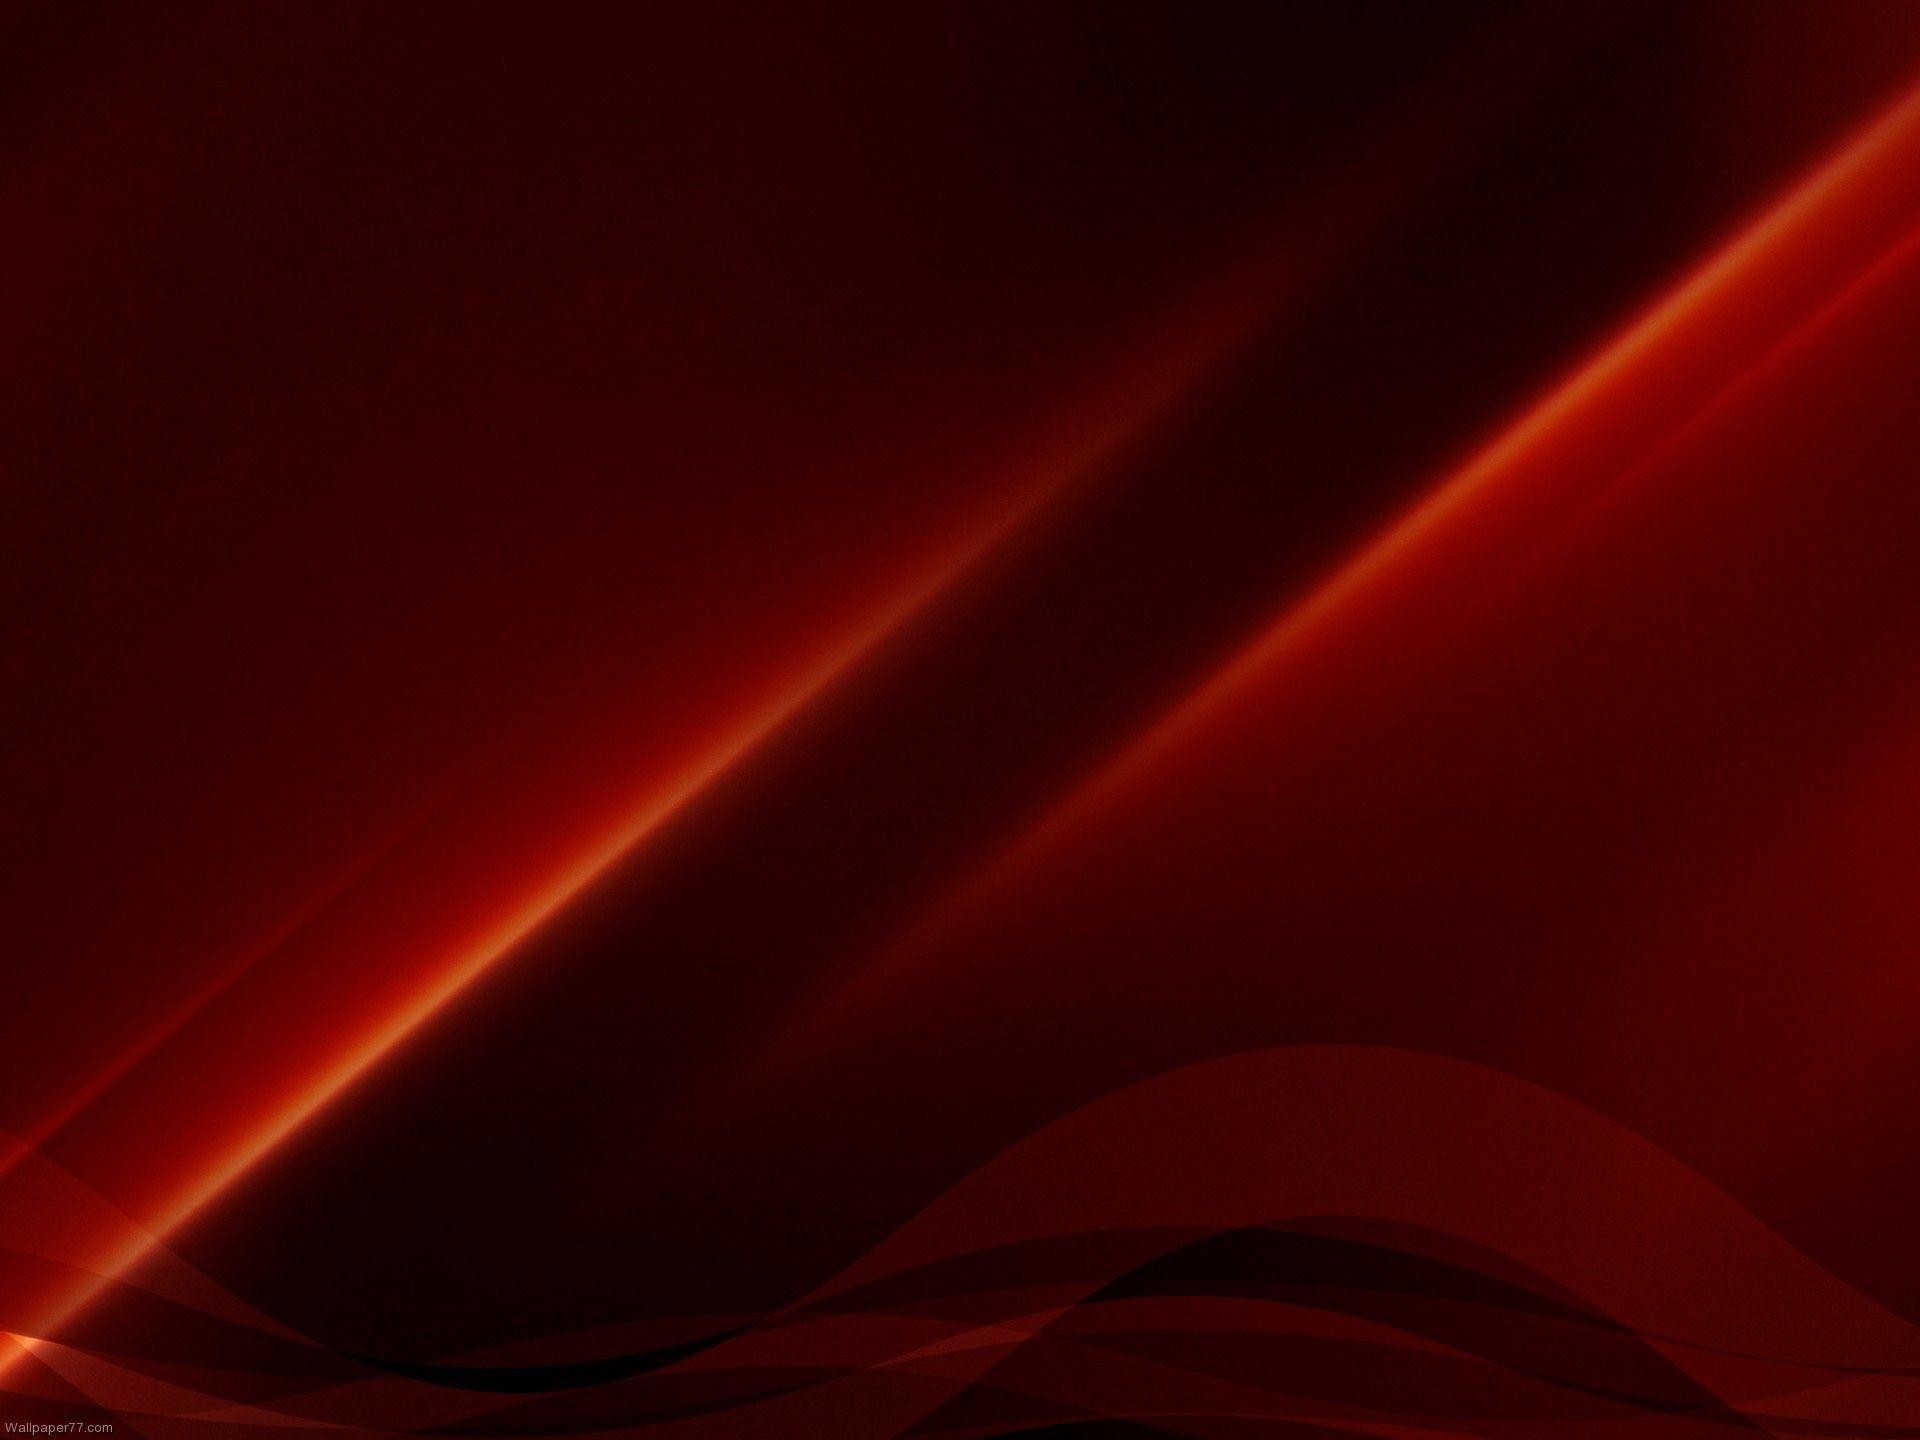 Dark Red Abstract Backgrounds Hd Background 9 HD Wallpapers